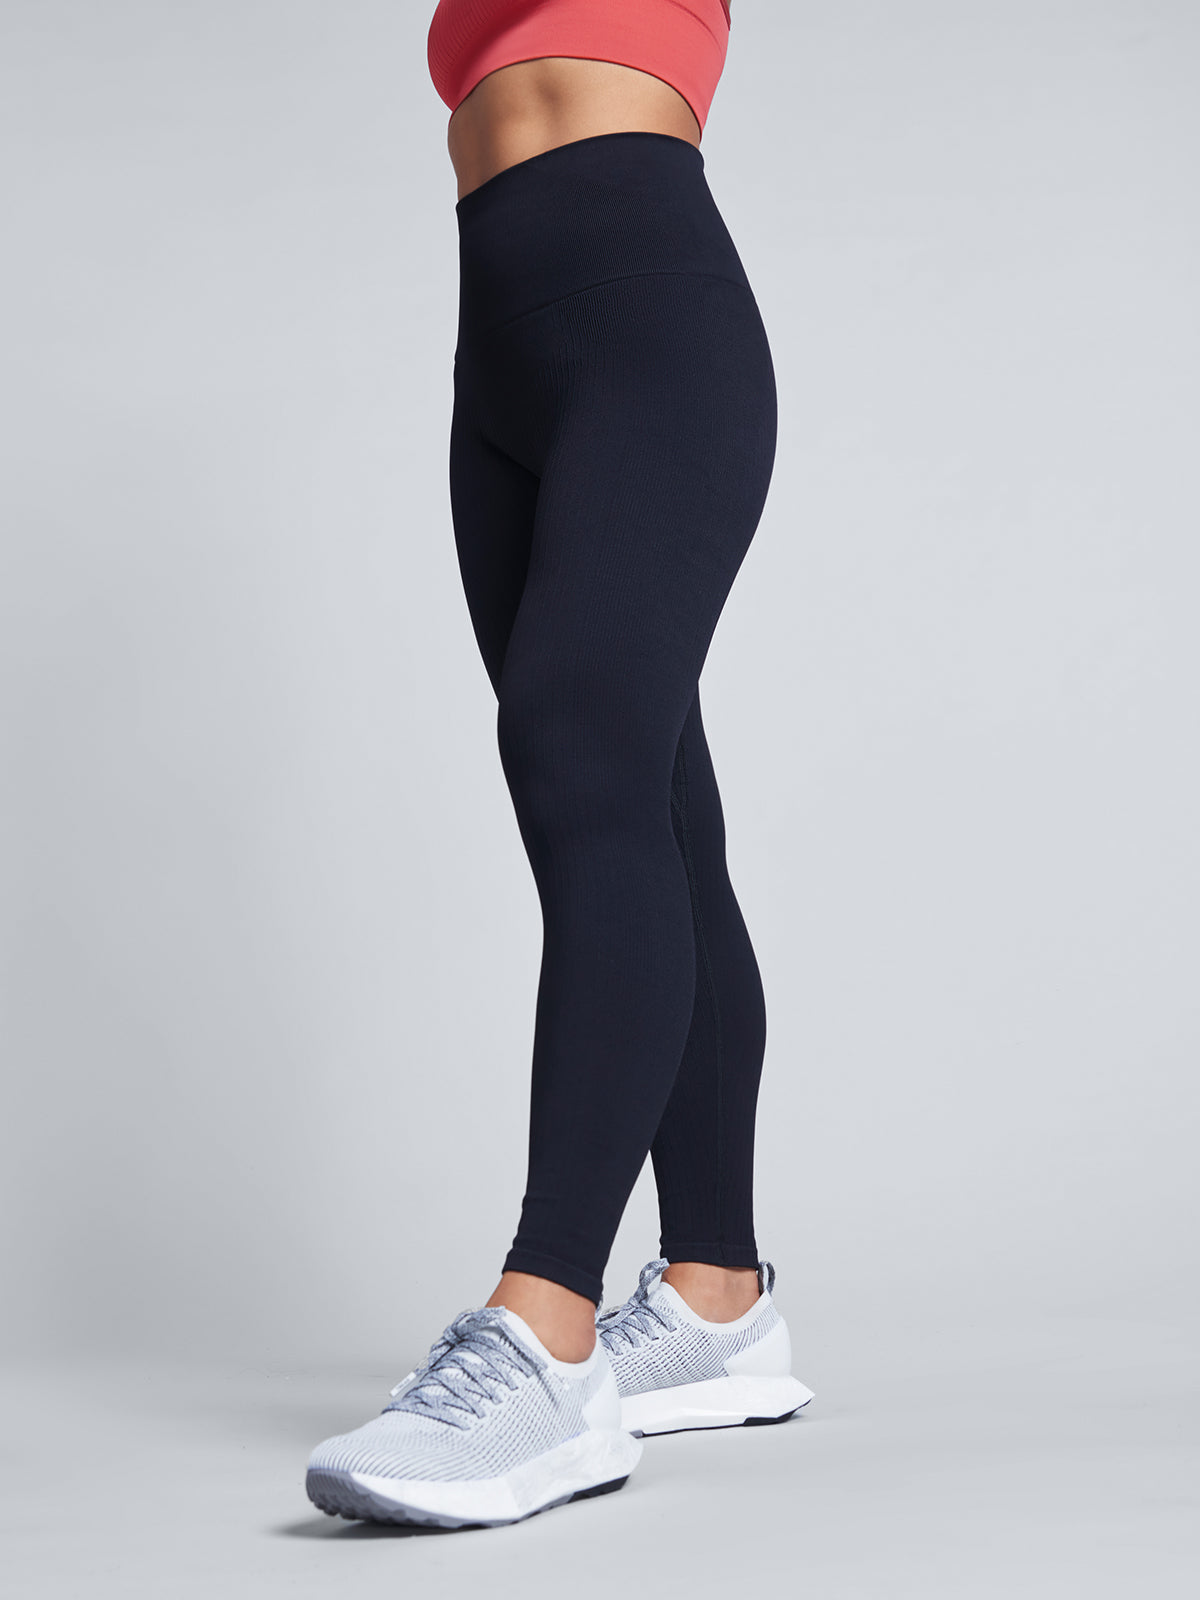 Has anyone ran in LNDR leggings? Would you recommend for long distances? :  r/running